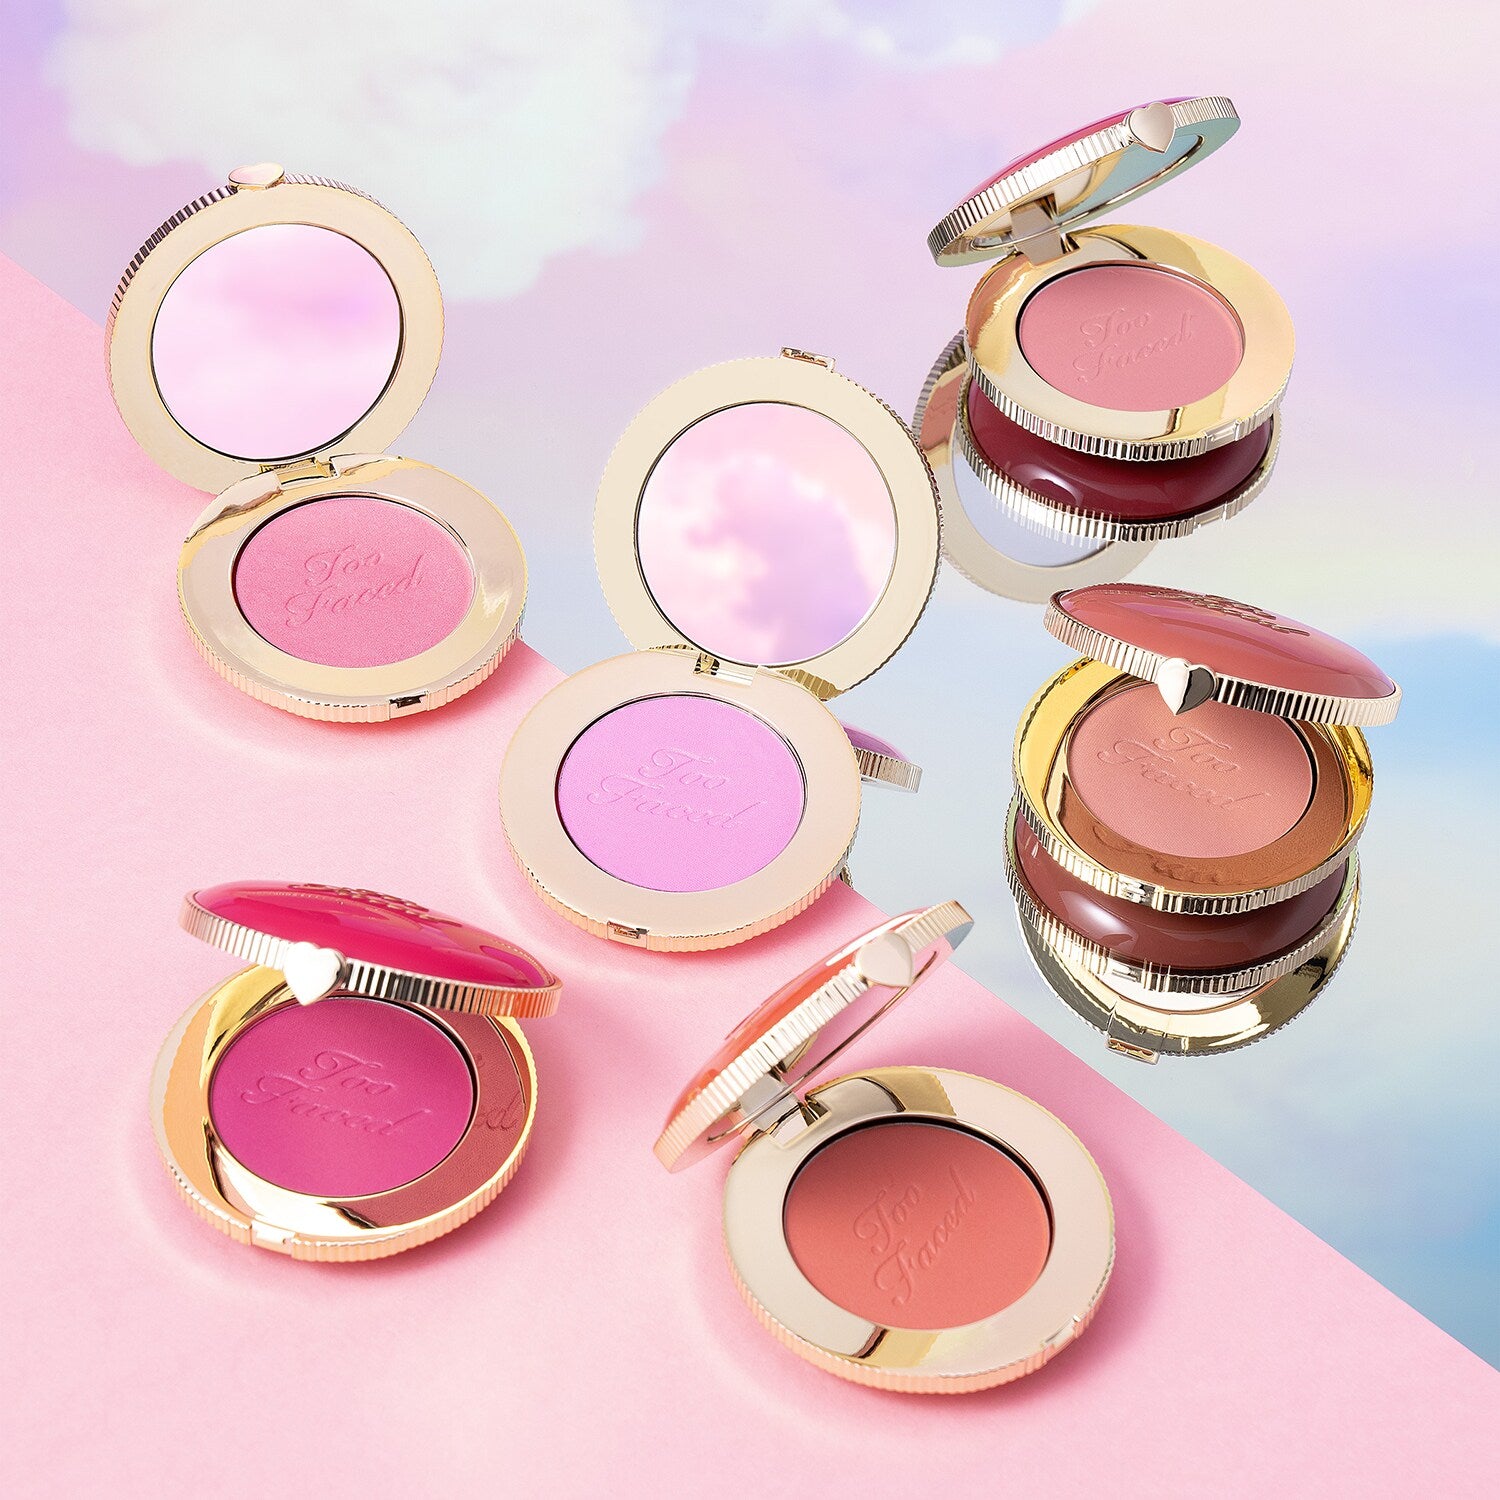 too-faced-cloud-crush-blush-soyeux-tequila-sunset